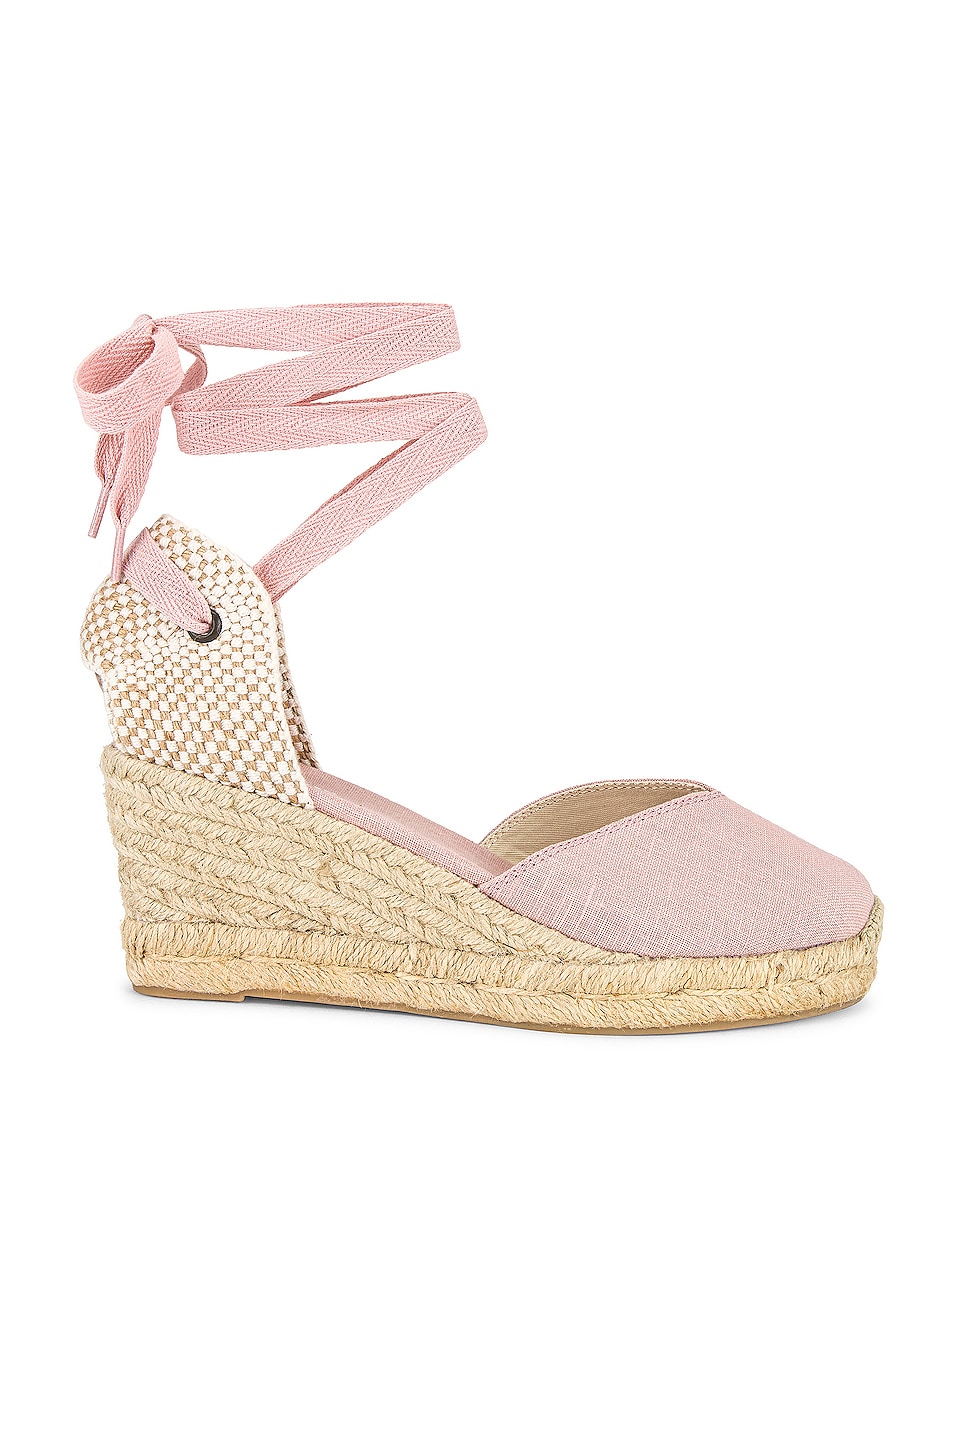 Soludos Lyon Wedge in Soft Pink | REVOLVE